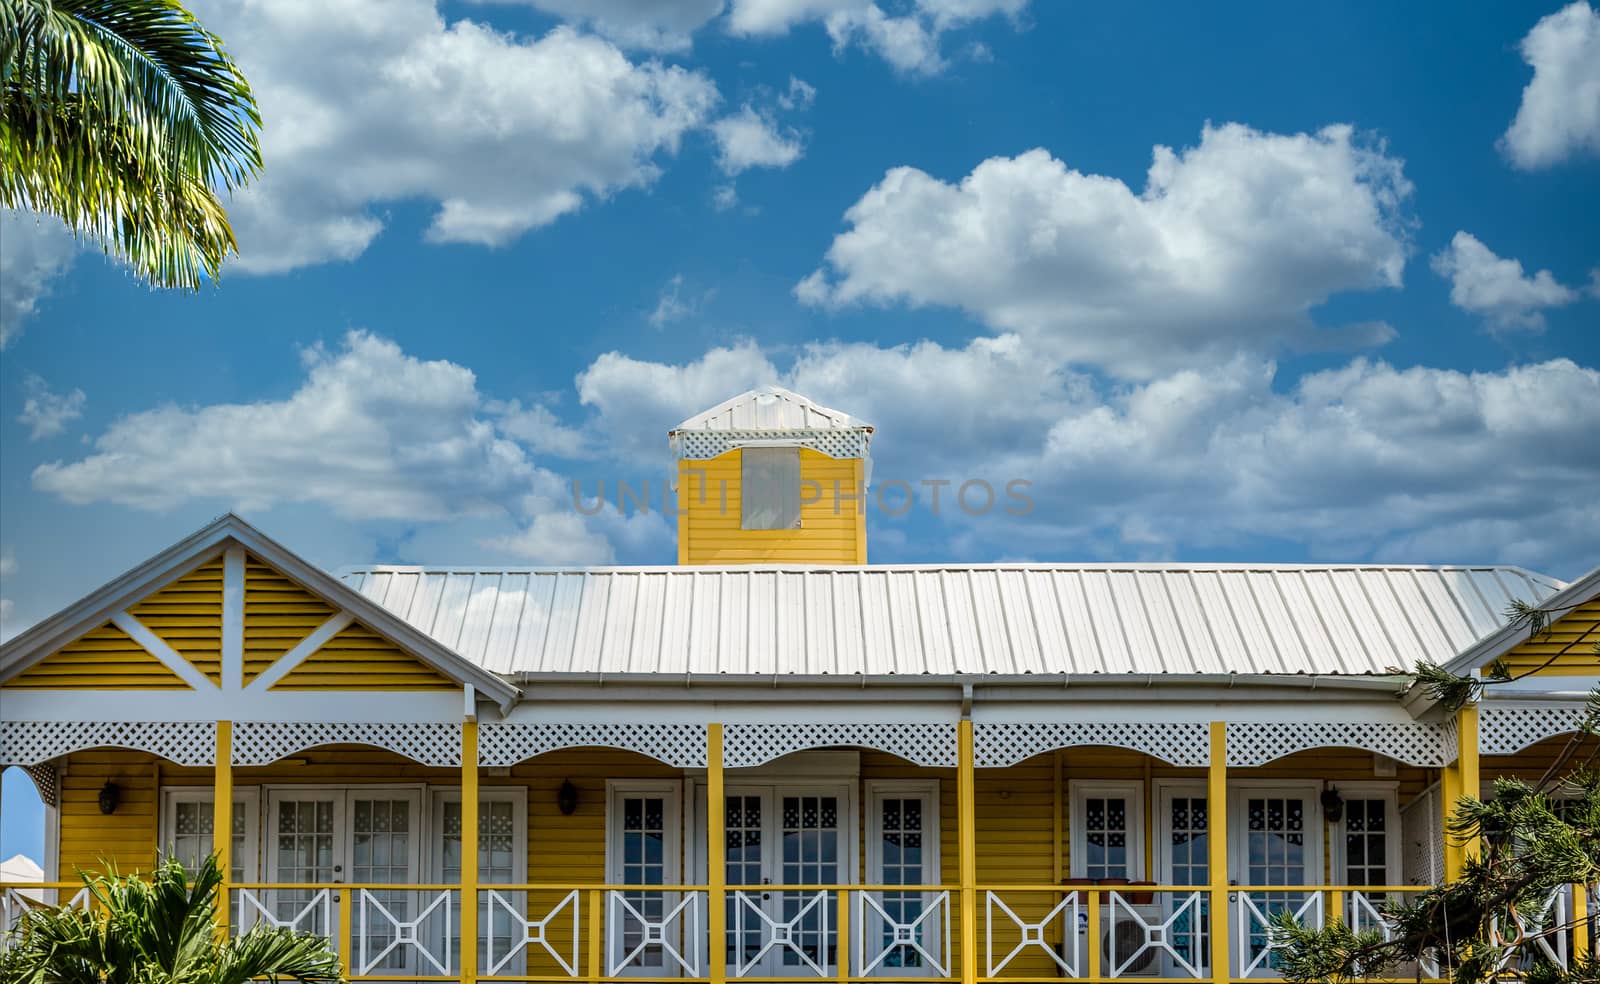 A large yellow tropical home under nice sky